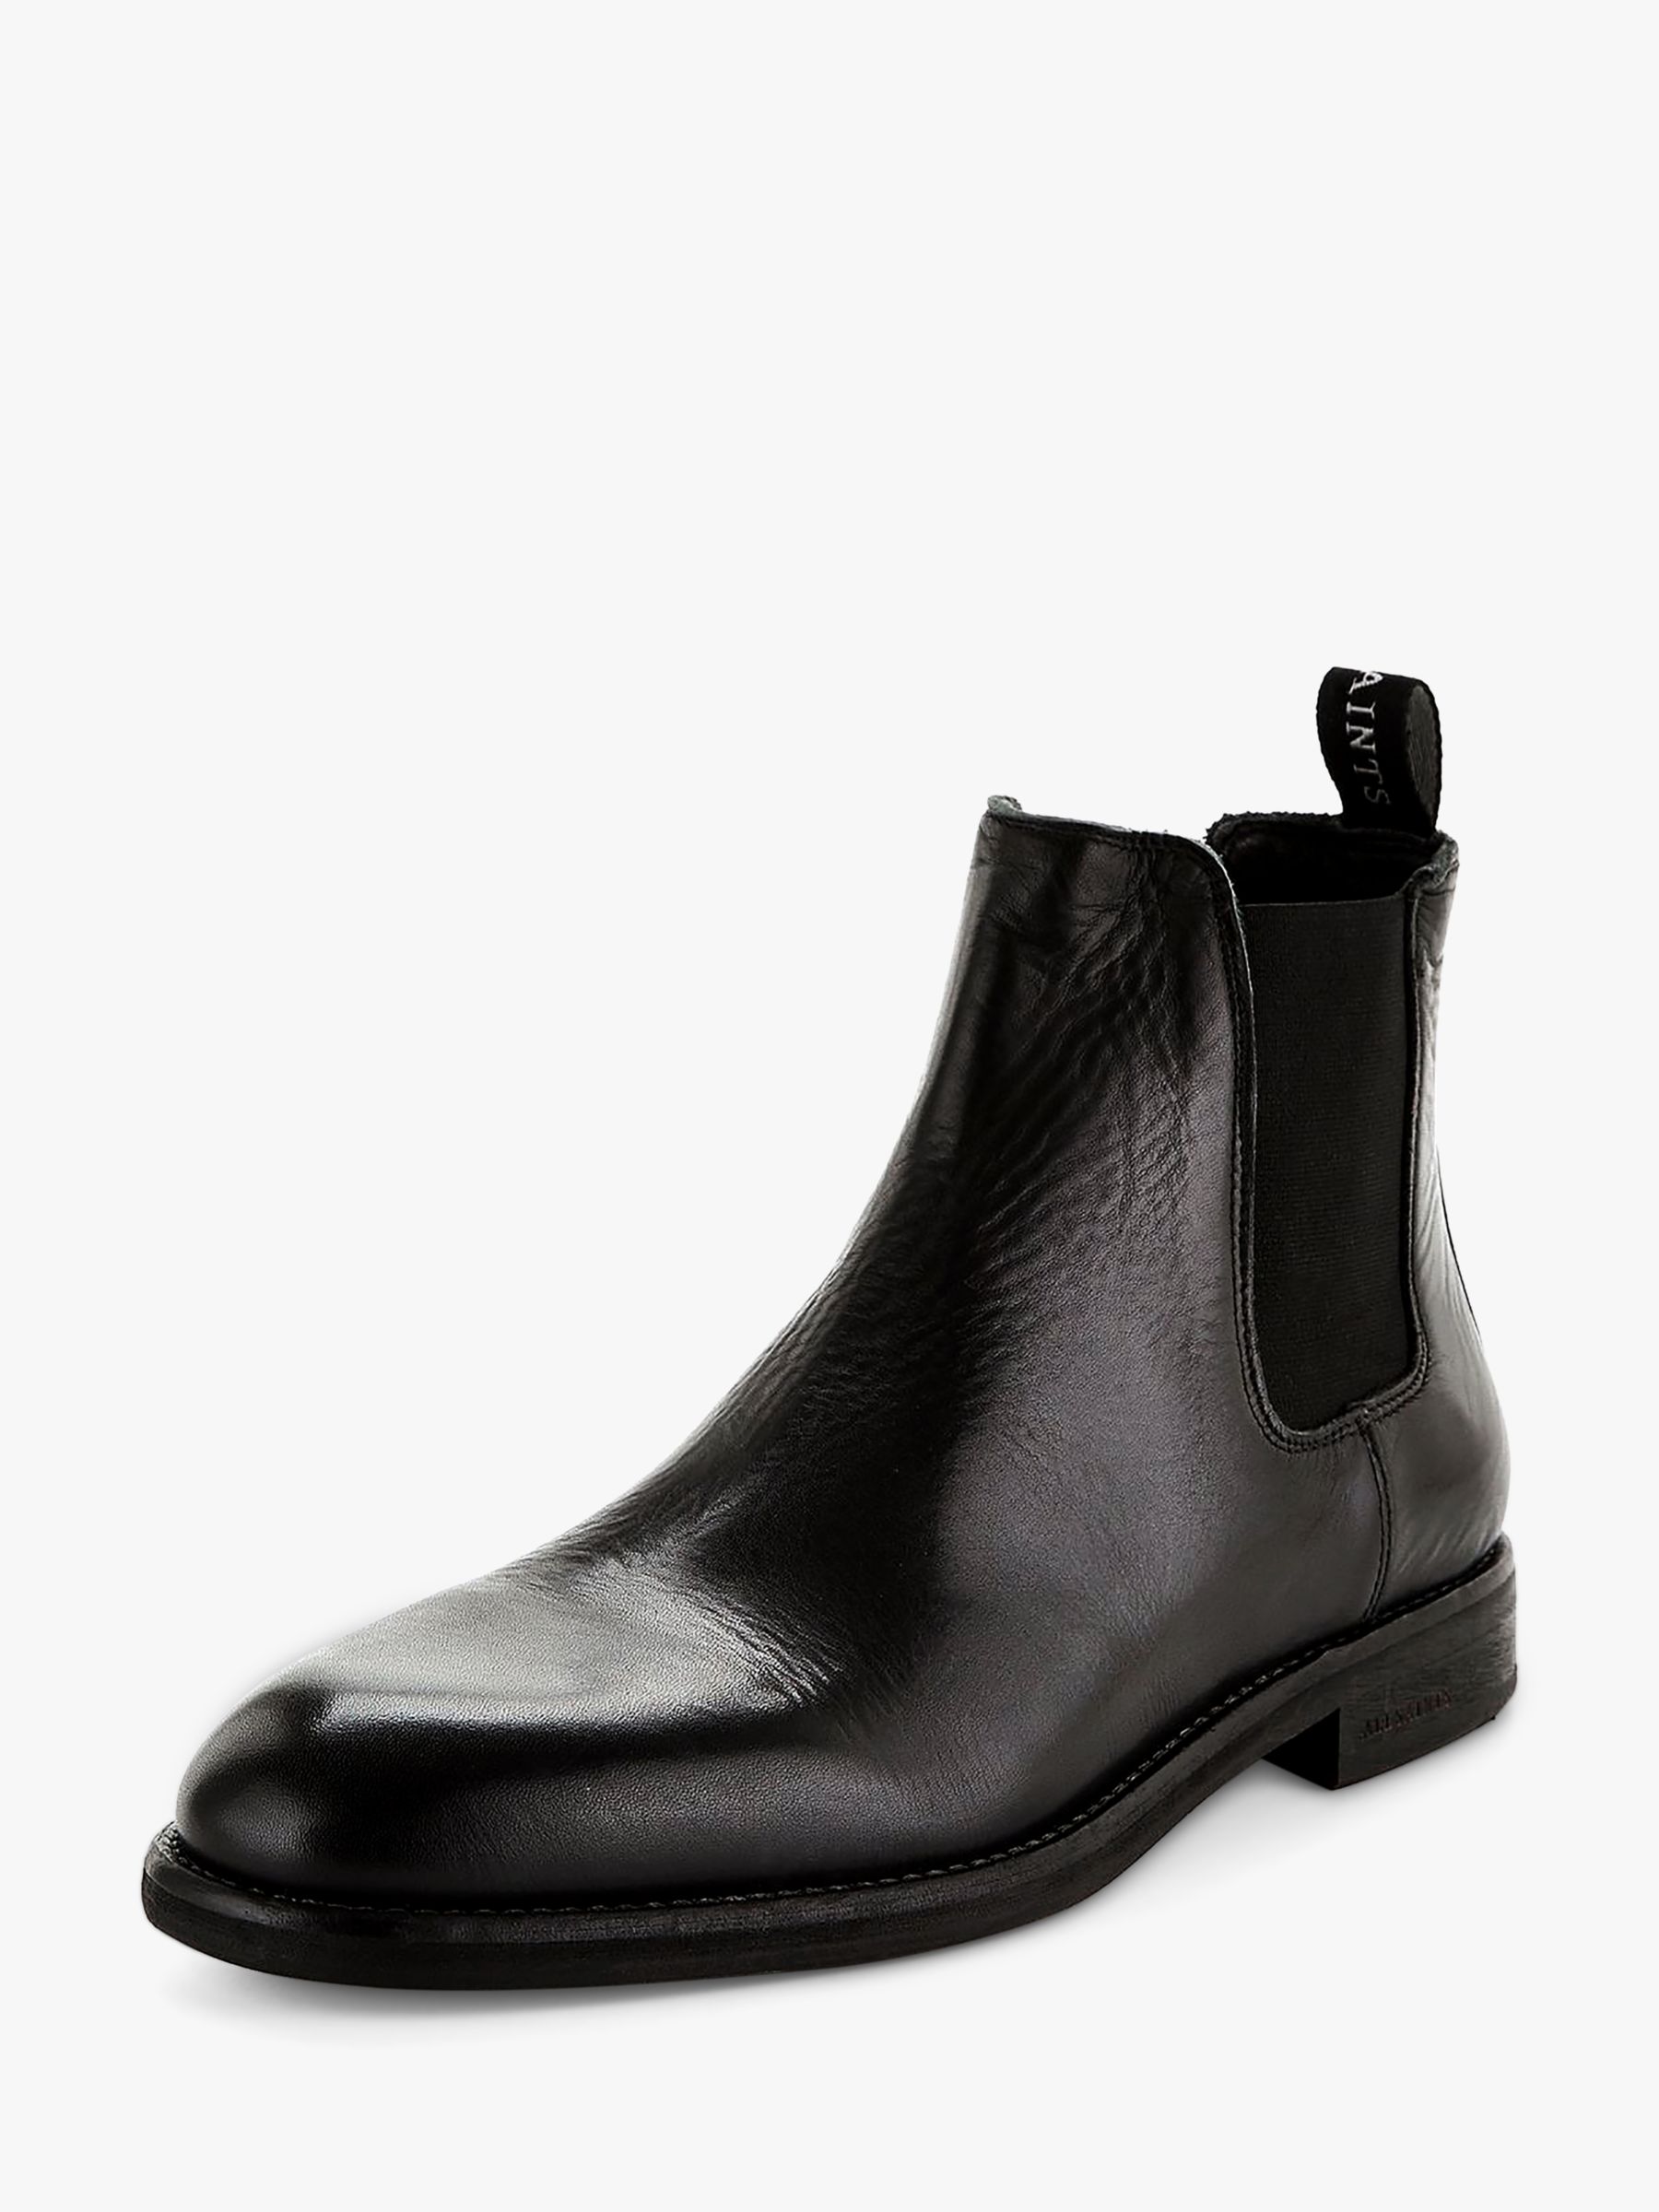 AllSaints Harley Leather Chelsea Boots, Black at John Lewis & Partners